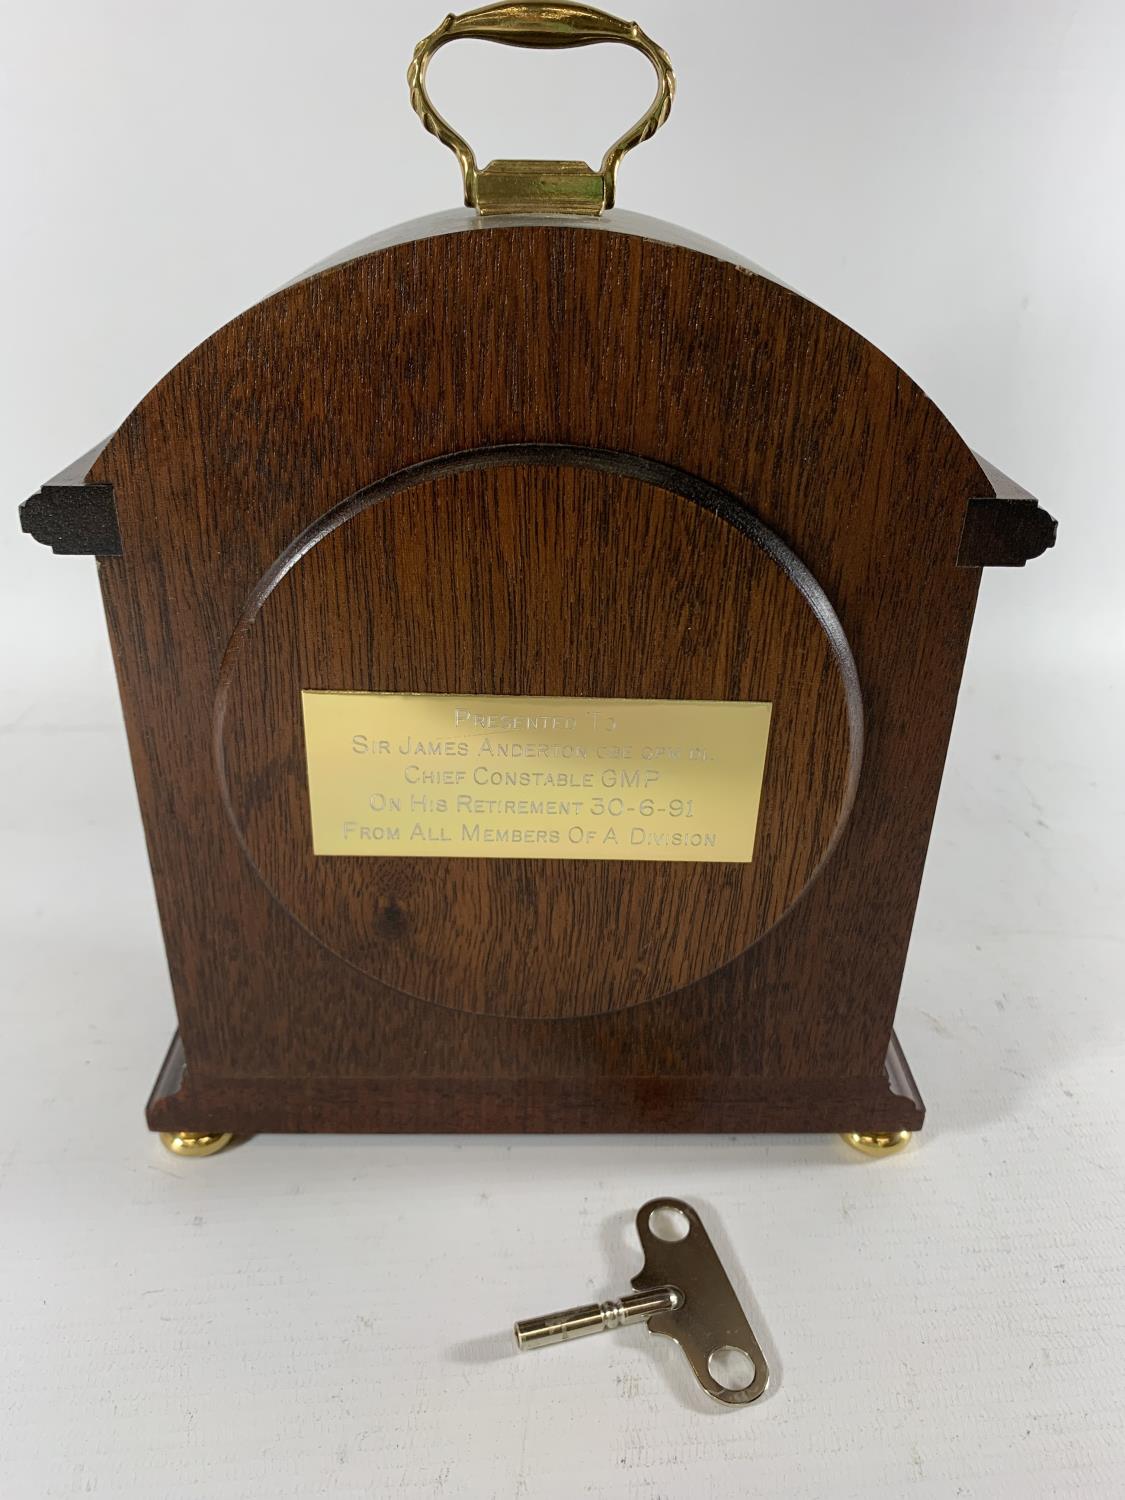 * A PRESENTATION MANTLE CLOCK BY WM WIDDOP, HEIGHT 25CM, PRESENTED BY G.M.P A DIVISION 1991 - Image 3 of 4